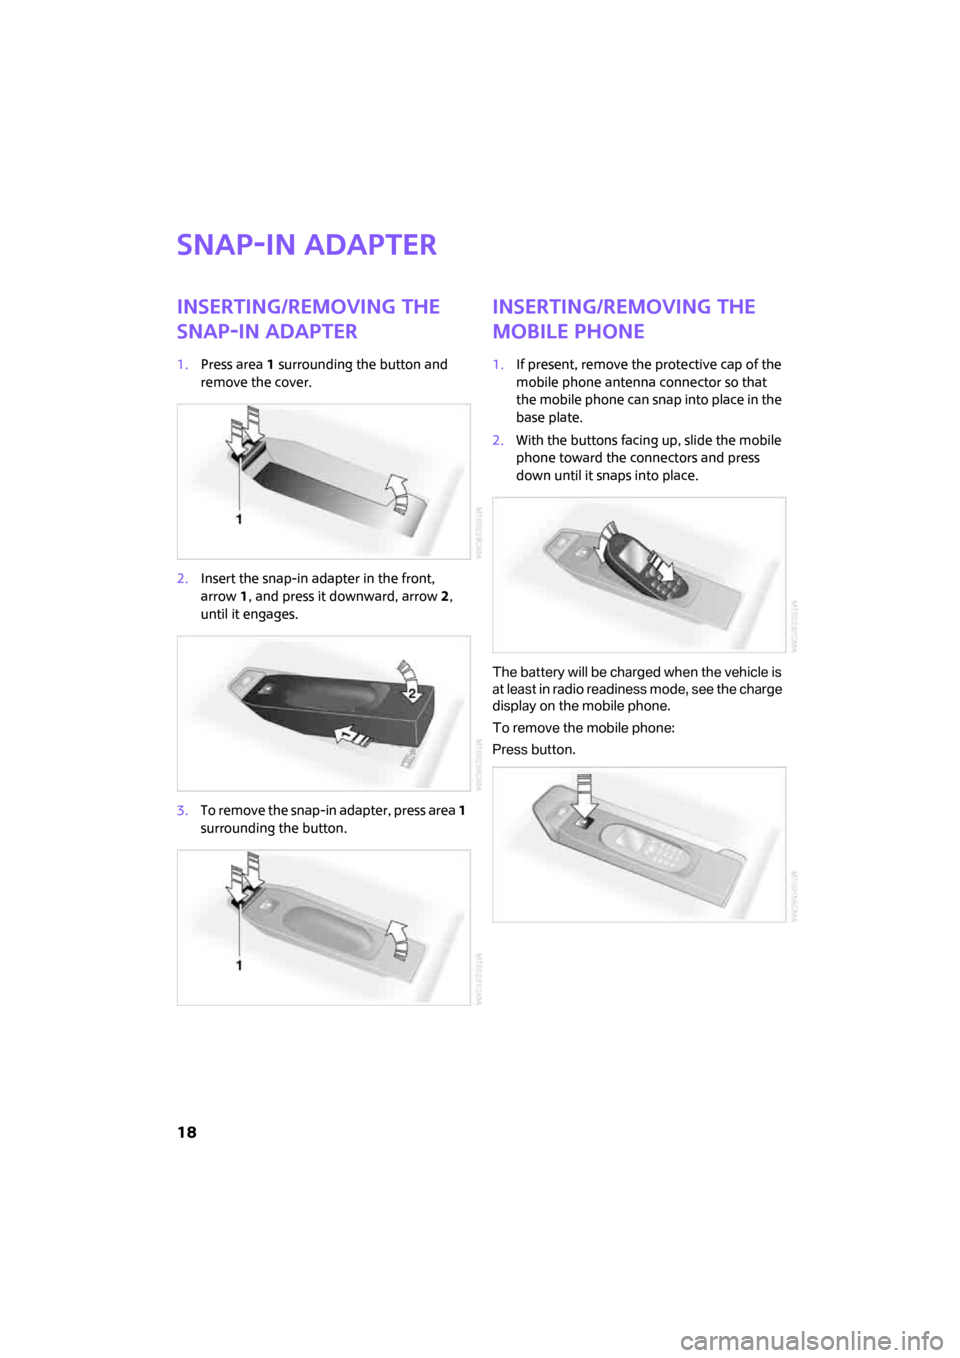 MINI Clubman 2008   (Mini Connected) User Guide 18
Snap-in adapter
Inserting/removing the 
snap-in adapter
1.Press area 1 surrounding the button and 
remove the cover.
2.Insert the snap-in adapter in the front, 
arrow1, and press it downward, arrow